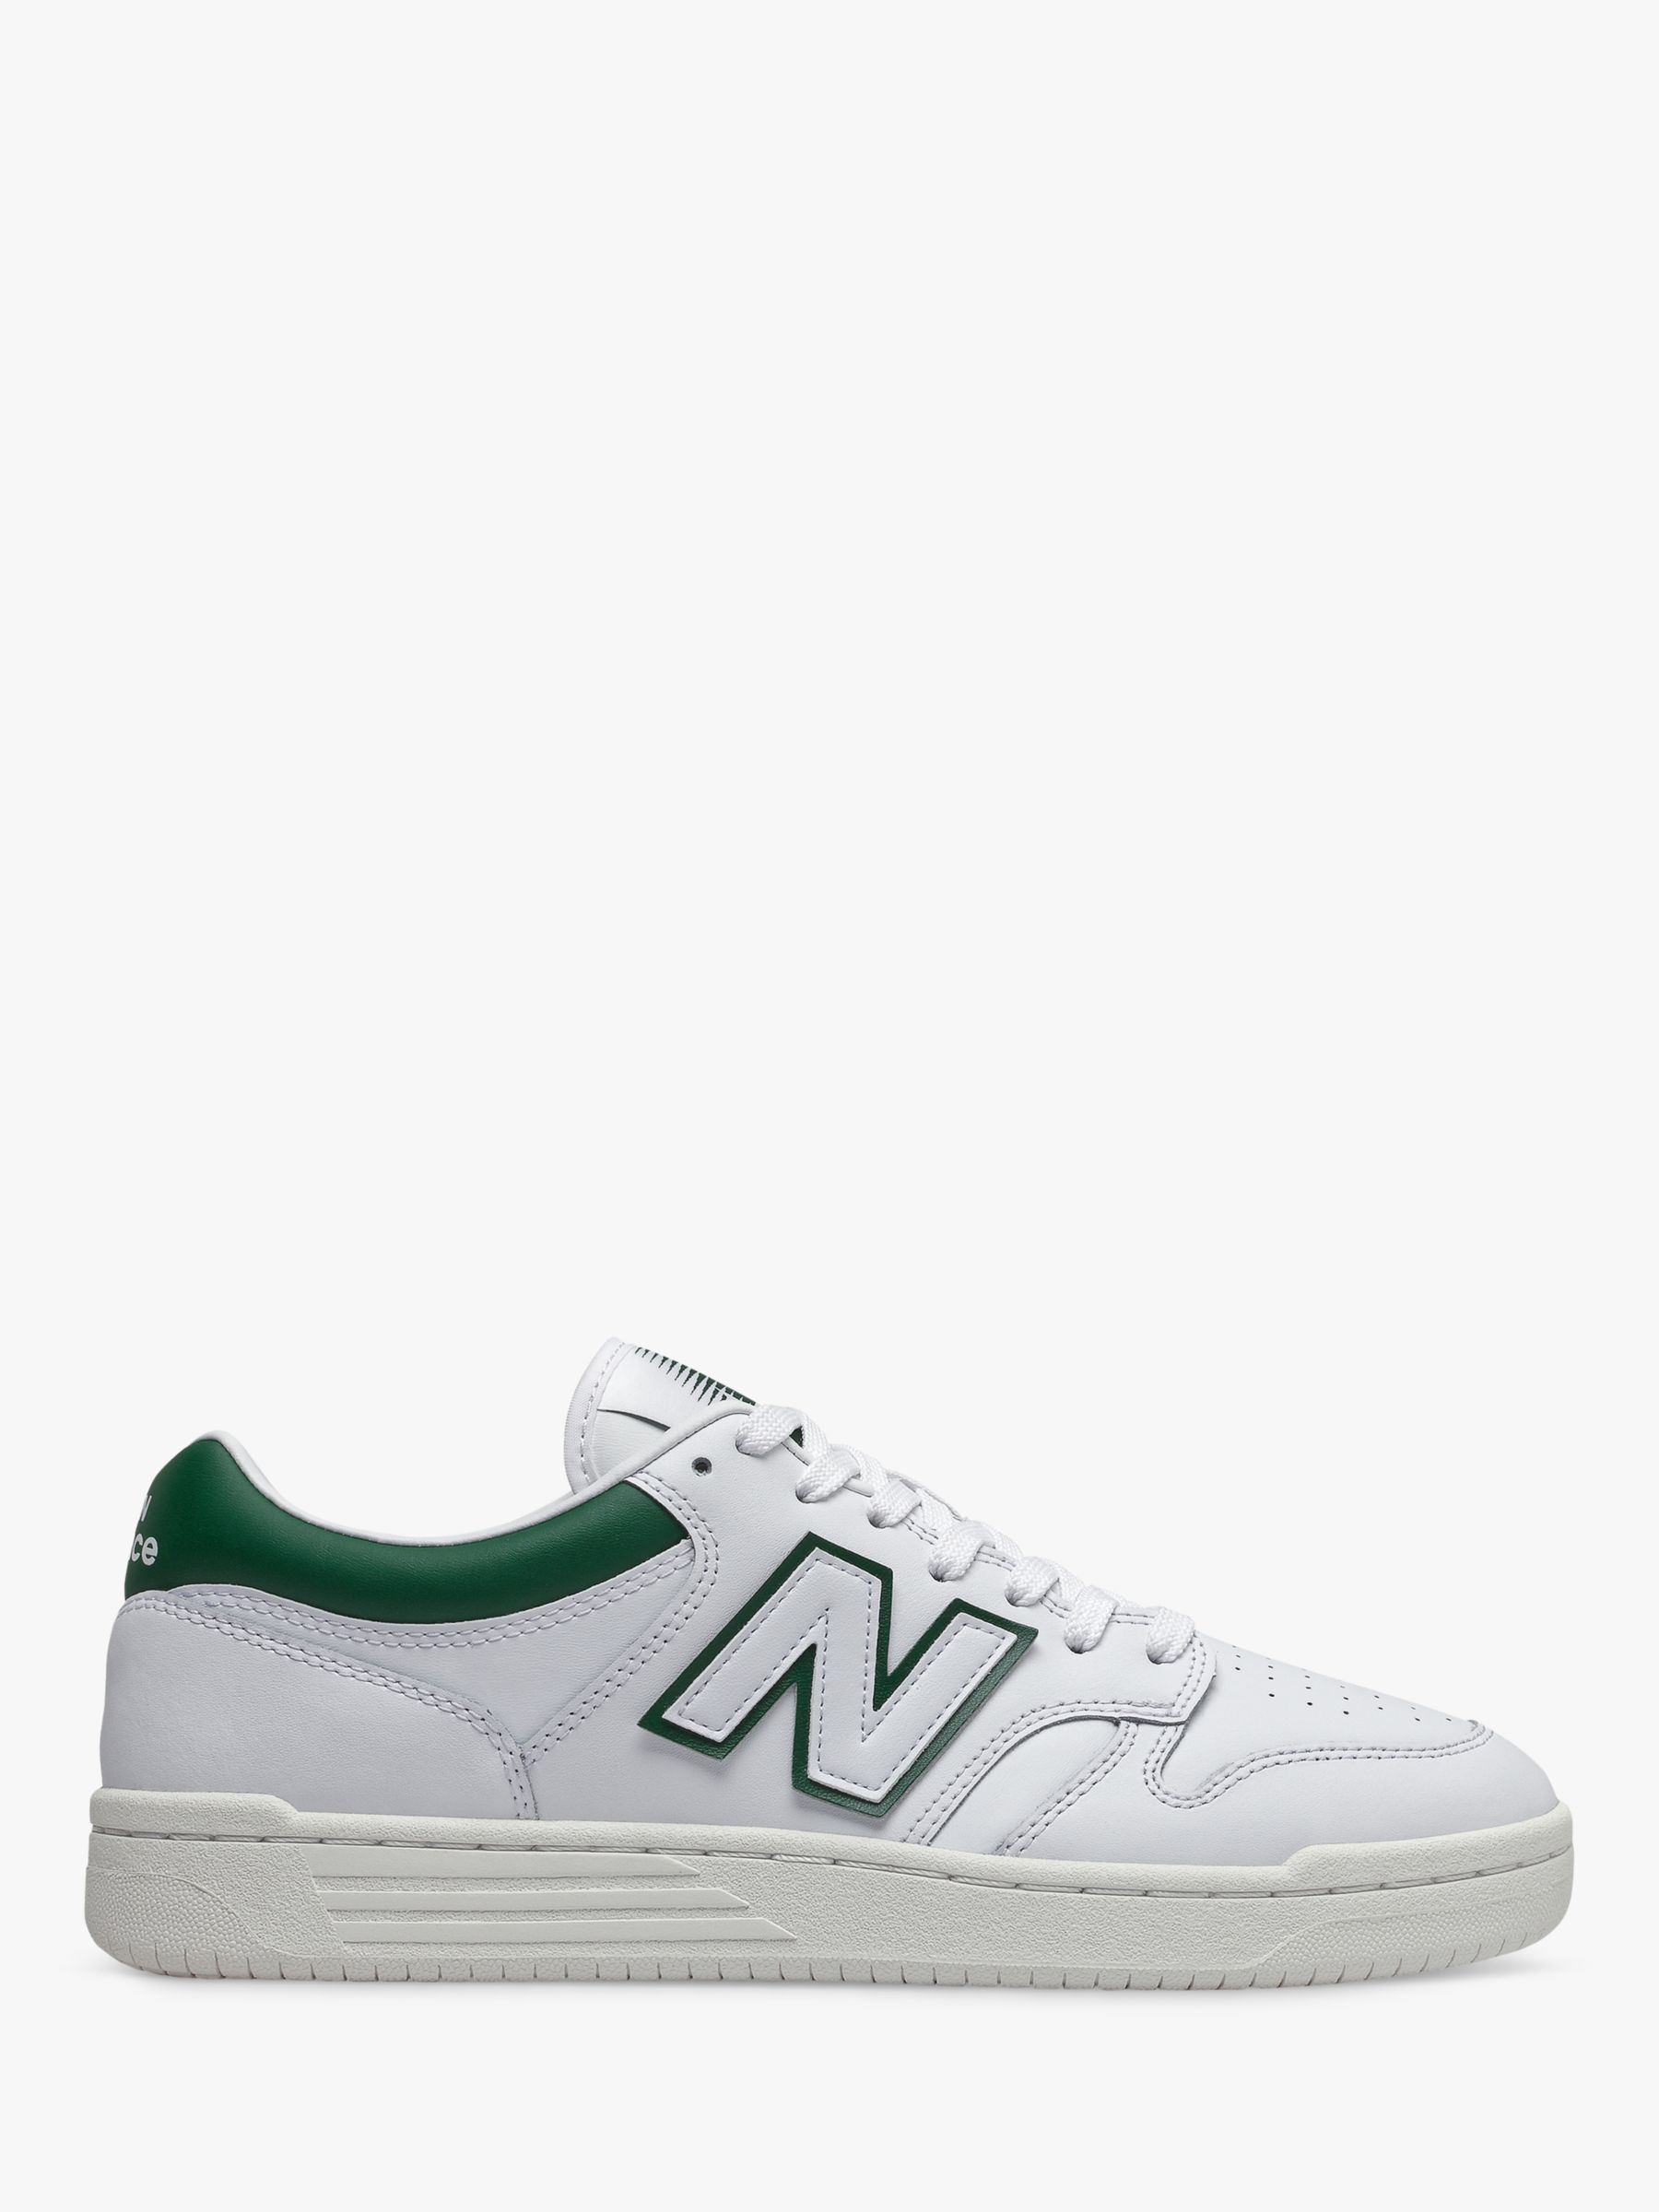 New Balance 480 Lace Up Trainers, White/Green, 10